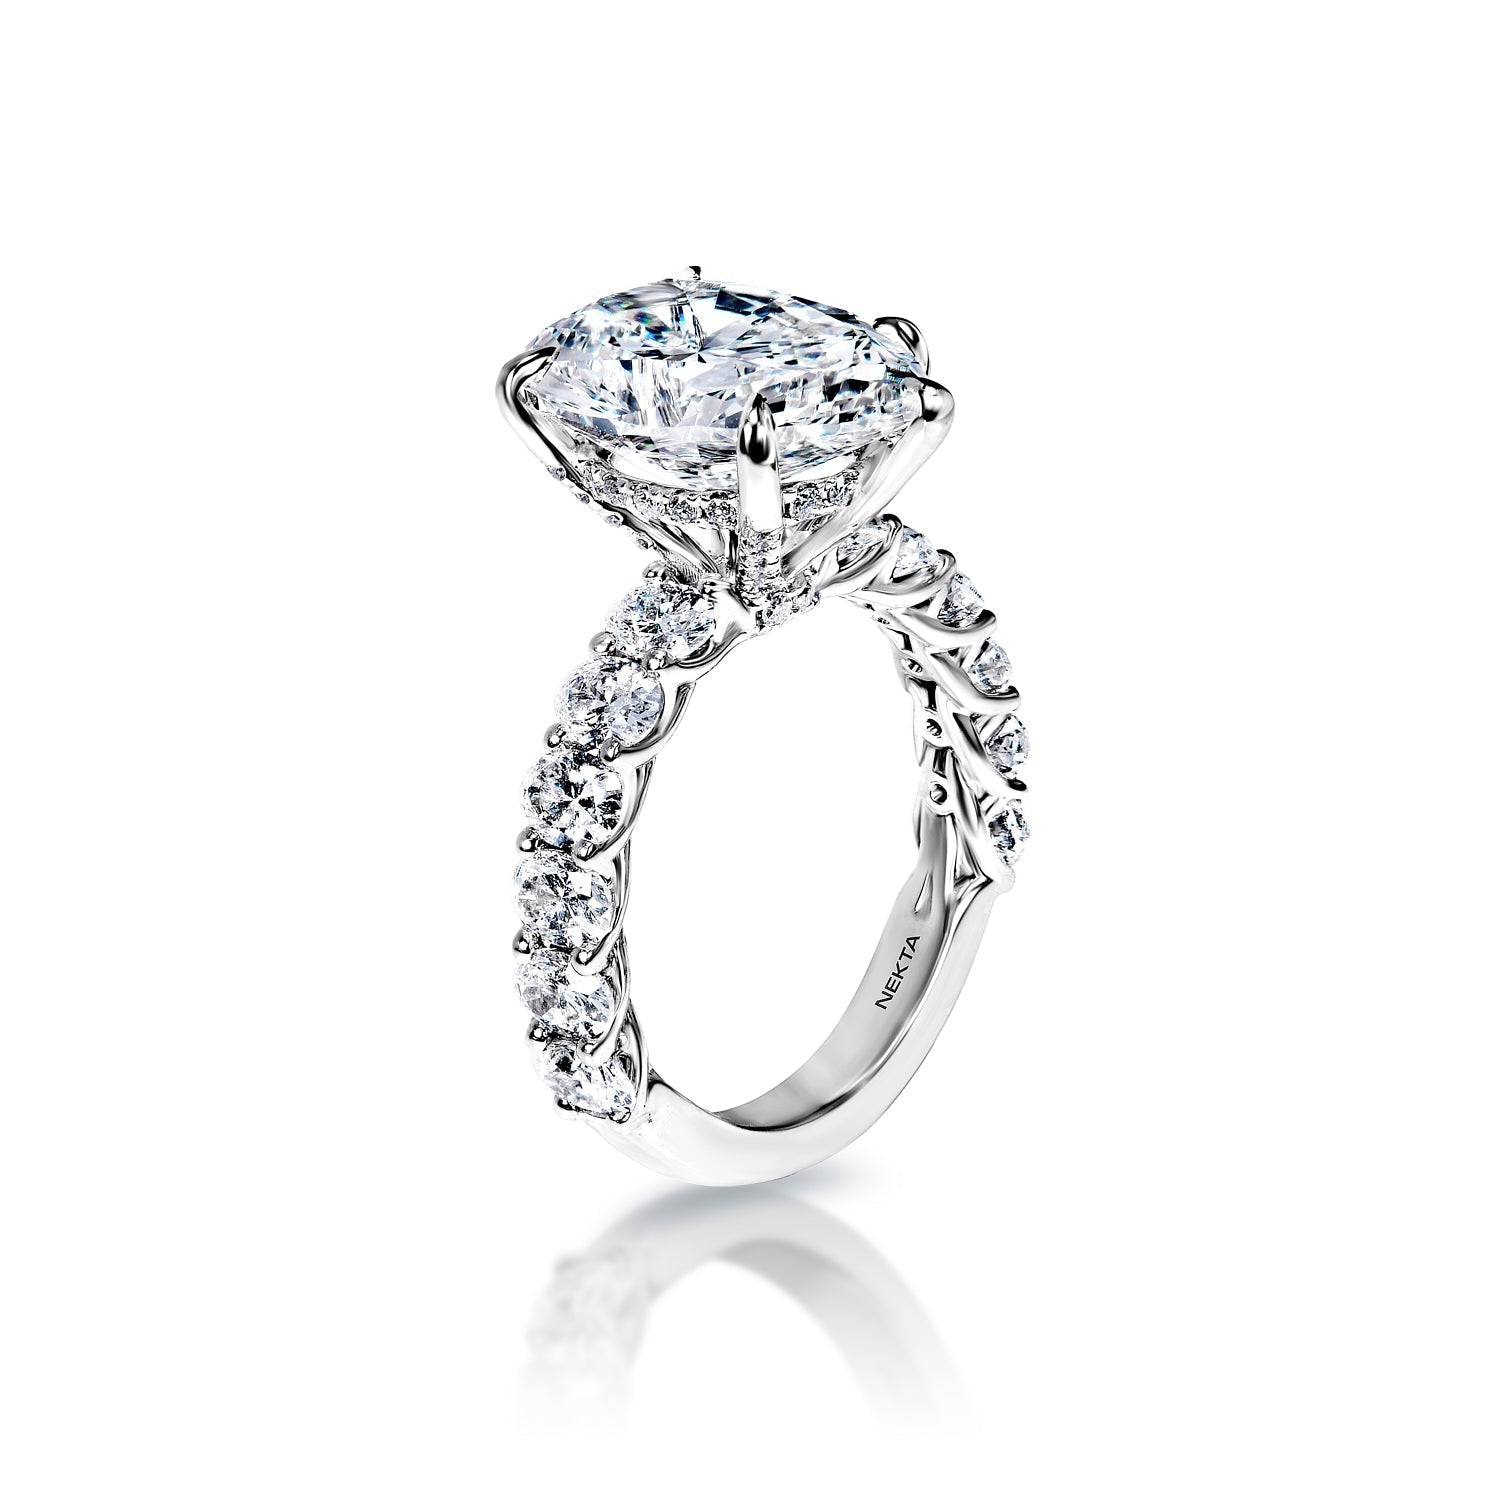 Ellianna 8 Carat H Internally Flawless Pear Shape Diamond Engagement Ring in 18k White Gold Side View